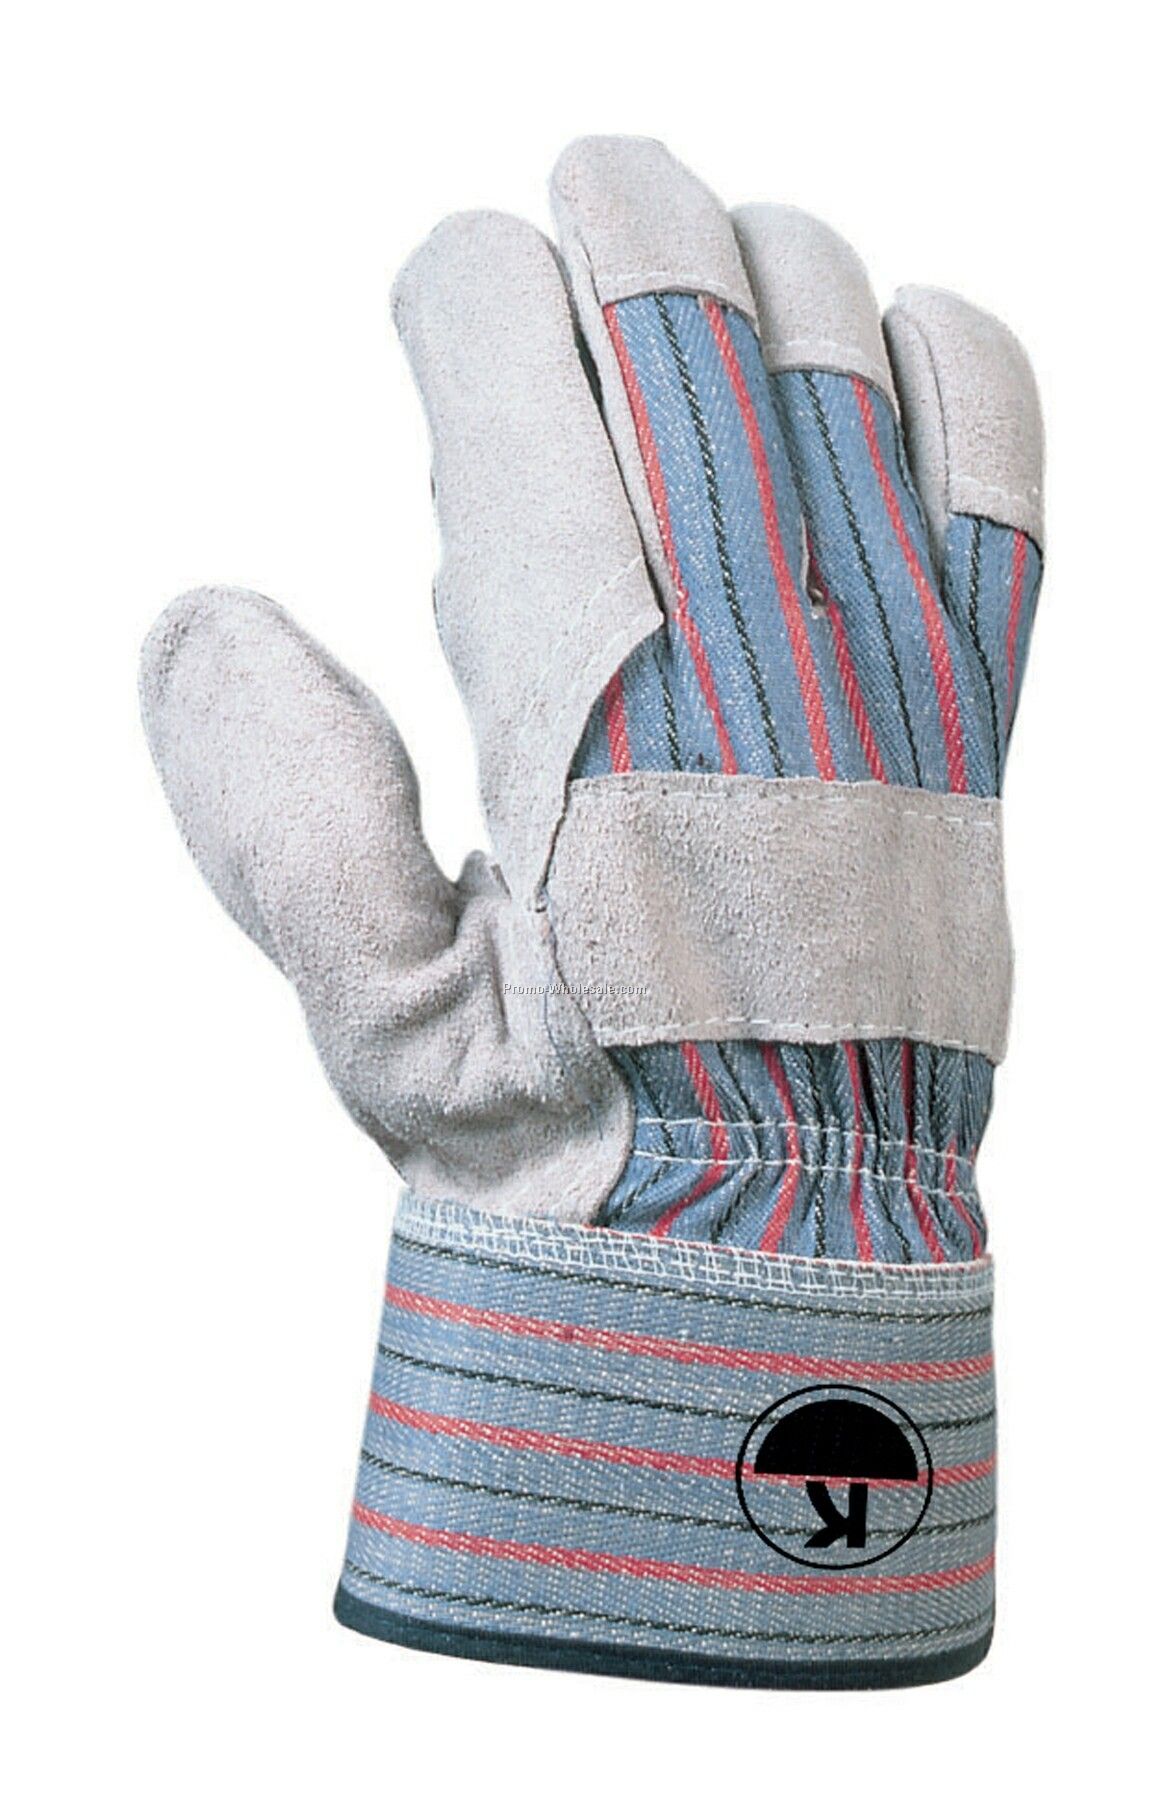 Split Leather Palm Cowhide Glove With Stripe Fabric Back (One Size)